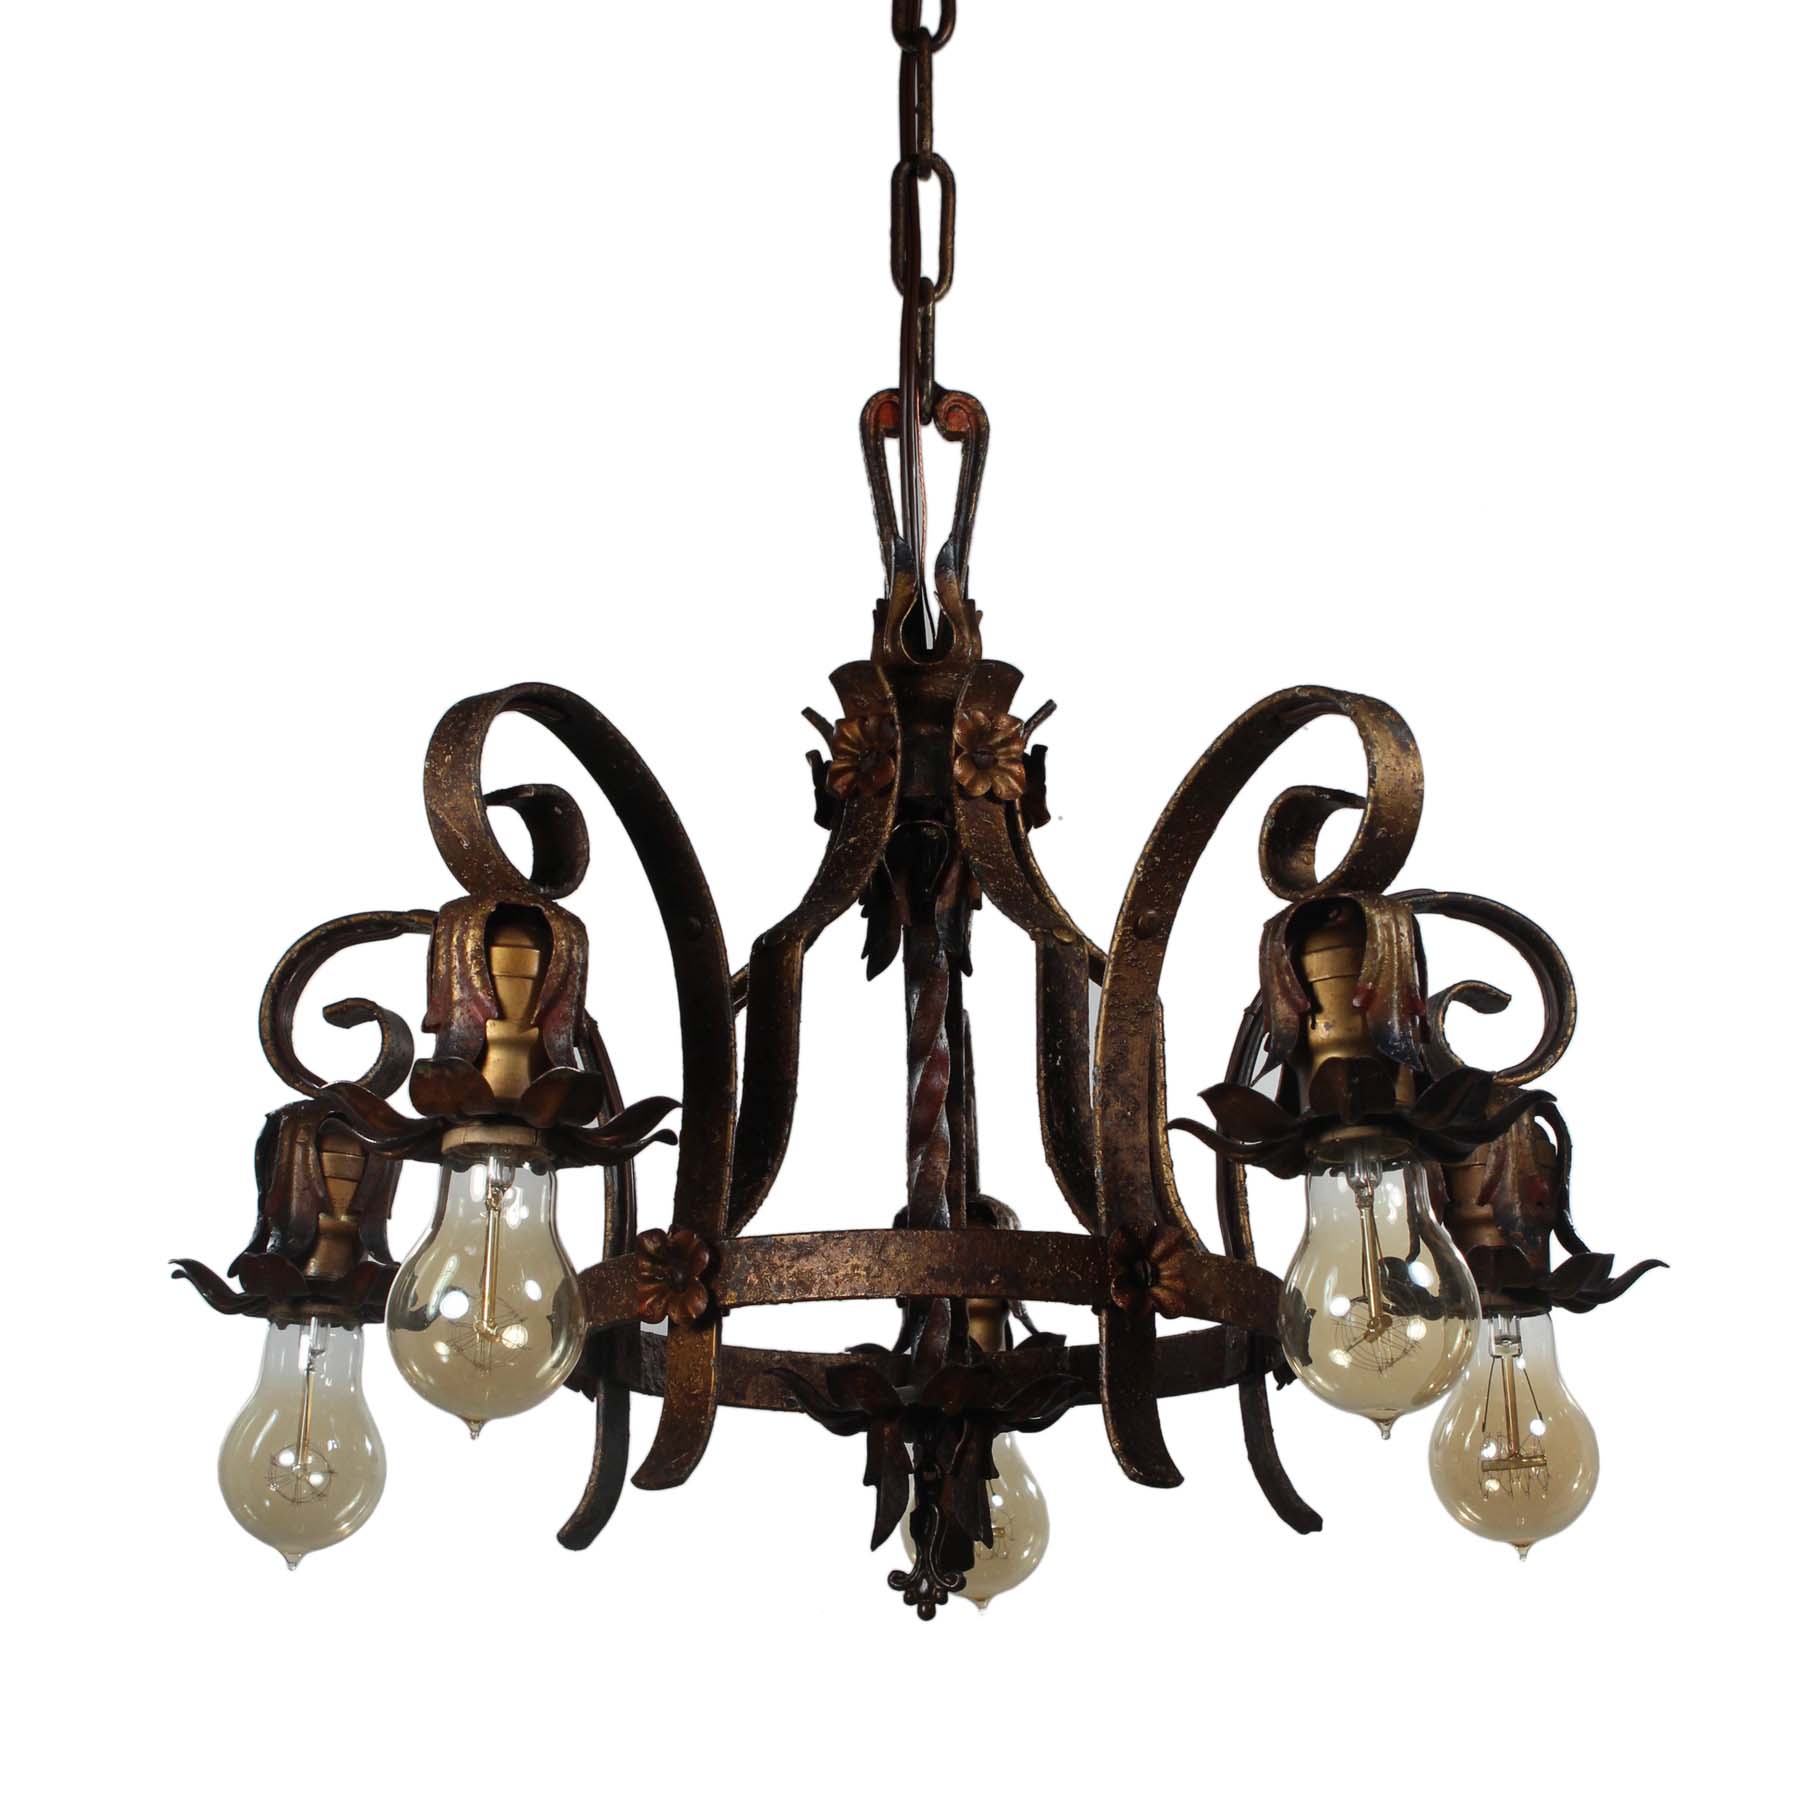 SOLD Antique Five-Light Iron Chandelier with Flowers, c. 1920s -0